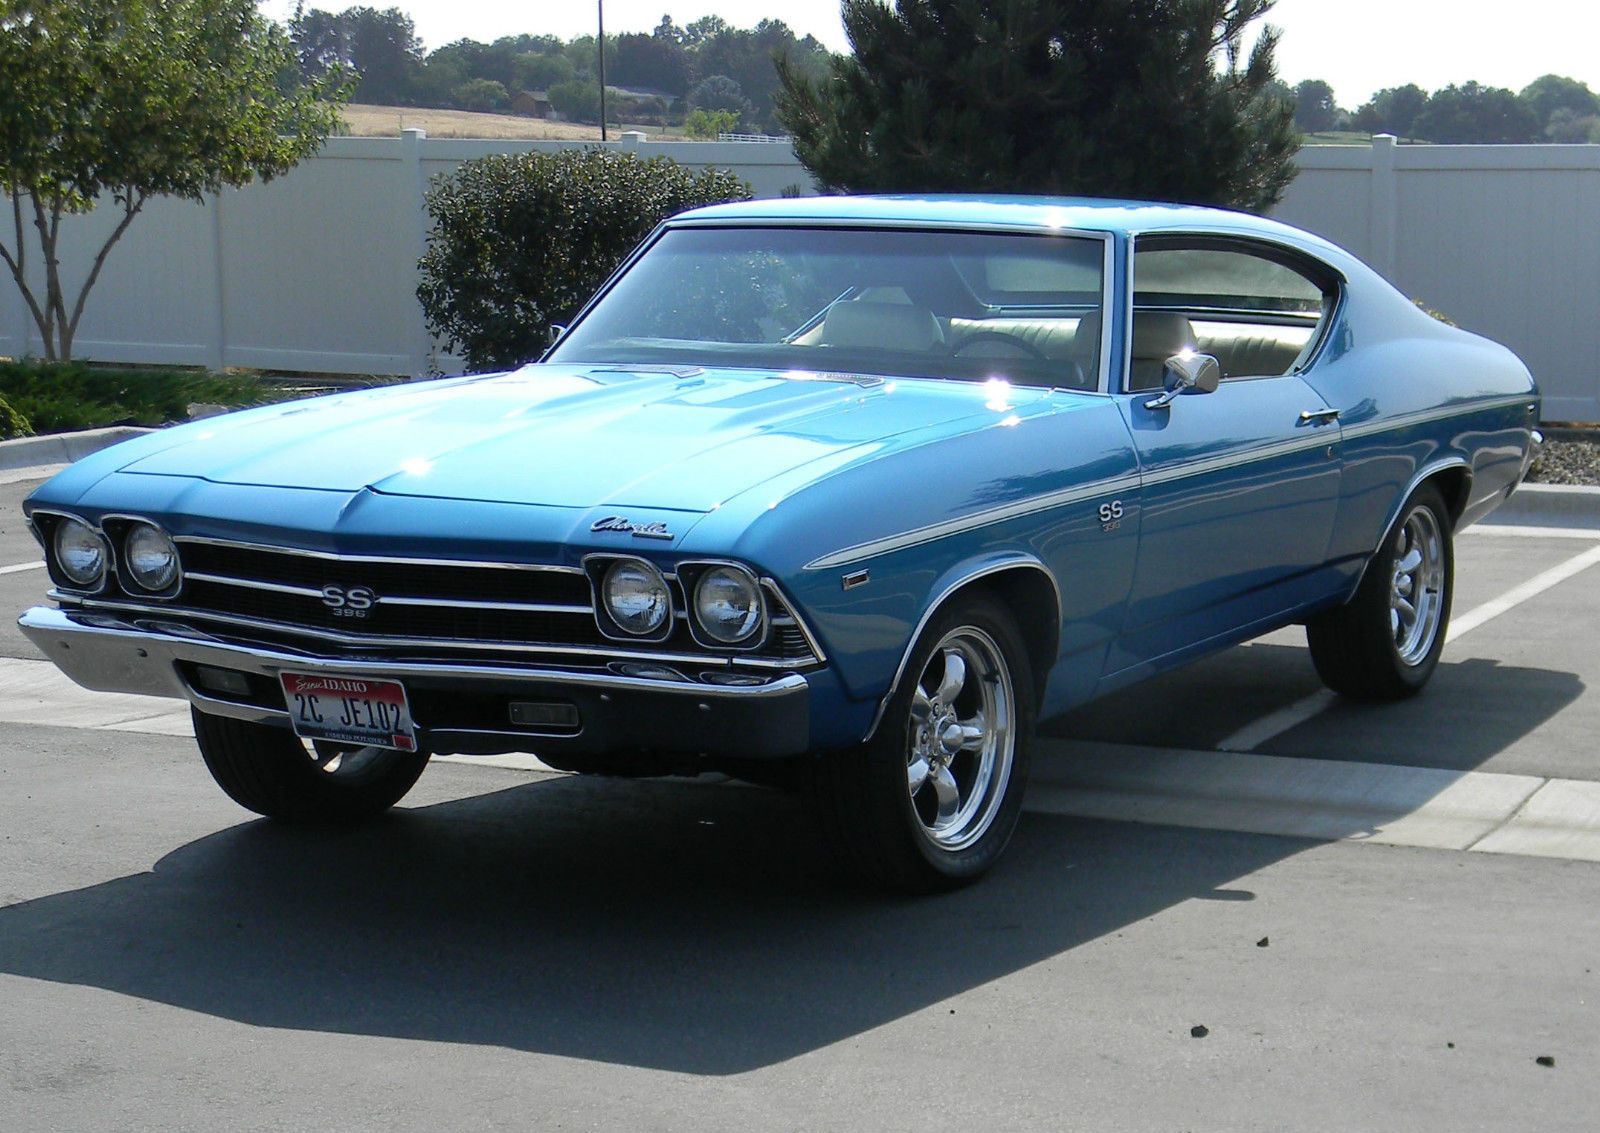 1969 Chevrolet Chevelle Ss -   Chevy Chevelle SS